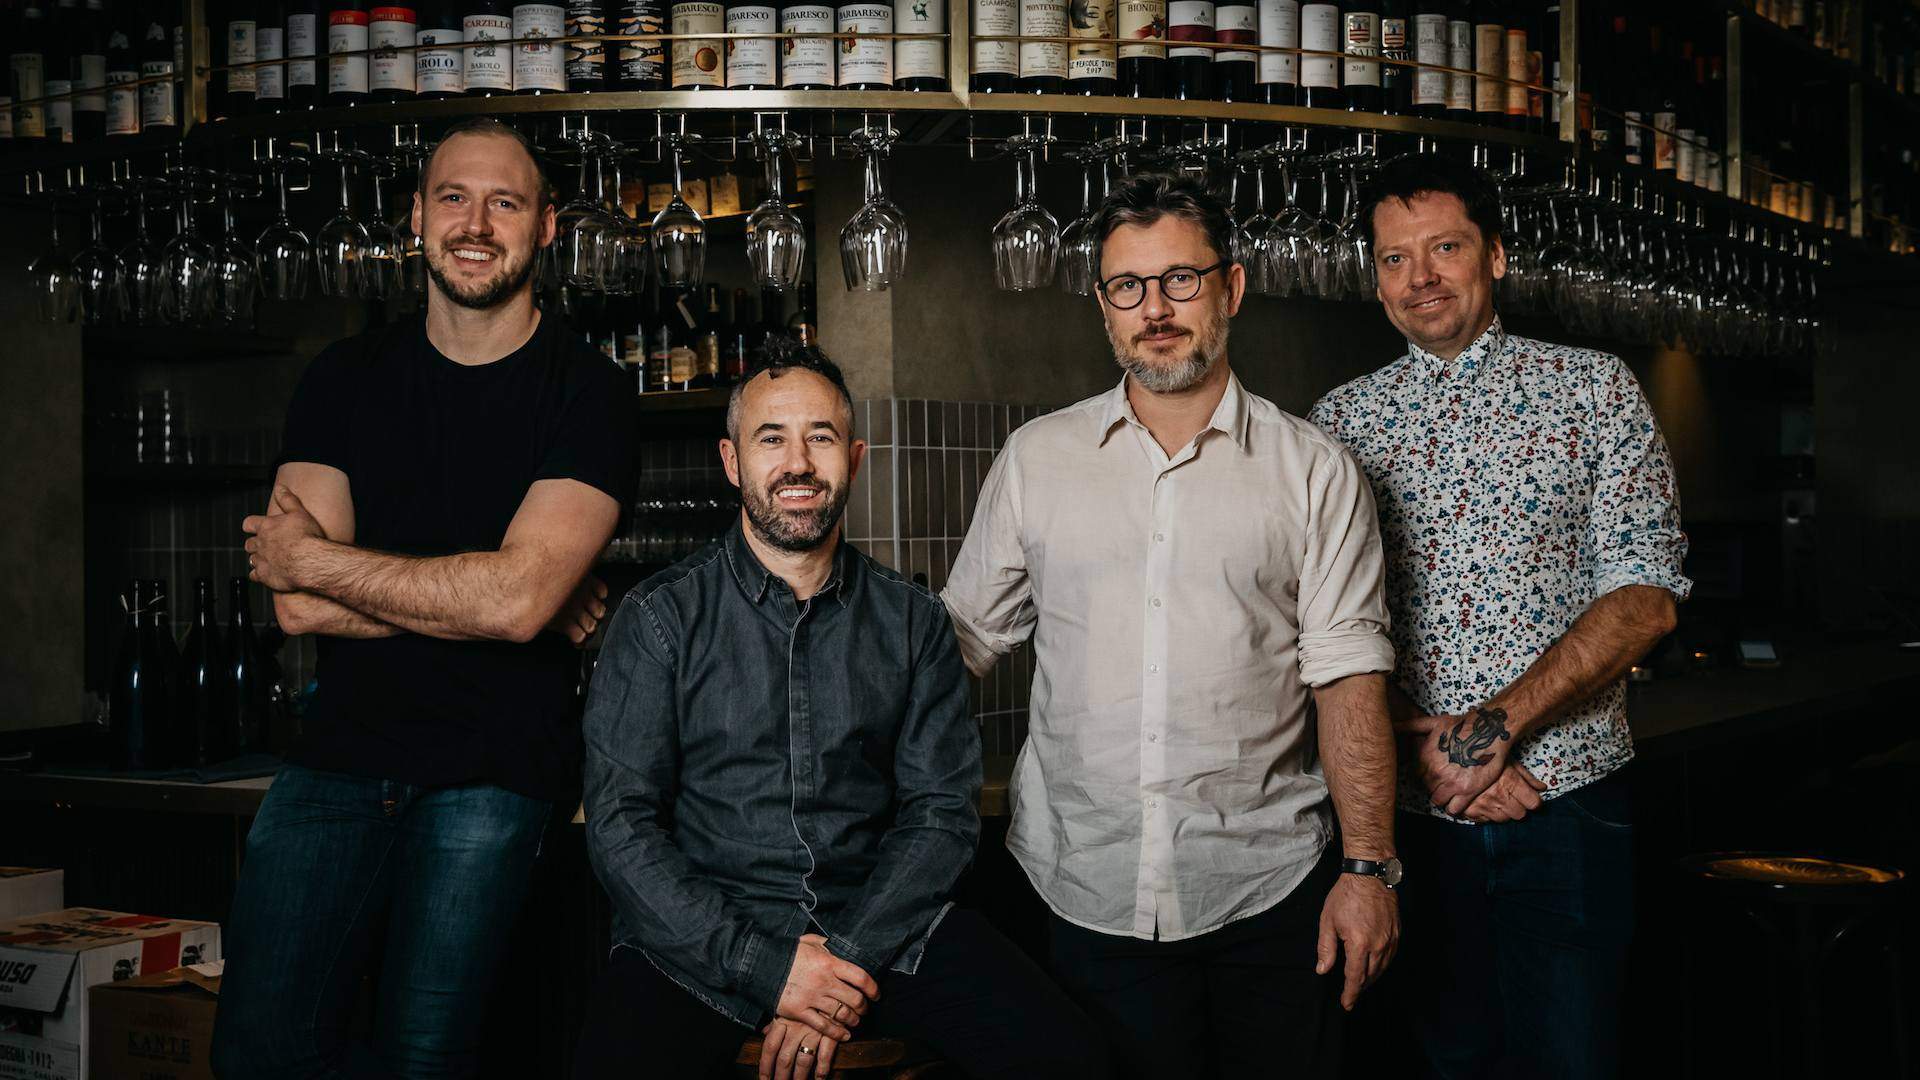 The Ragazzi Team Is Opening a CBD Shop Selling Lo-Fi Wines and Fresh Pasta by the Gram